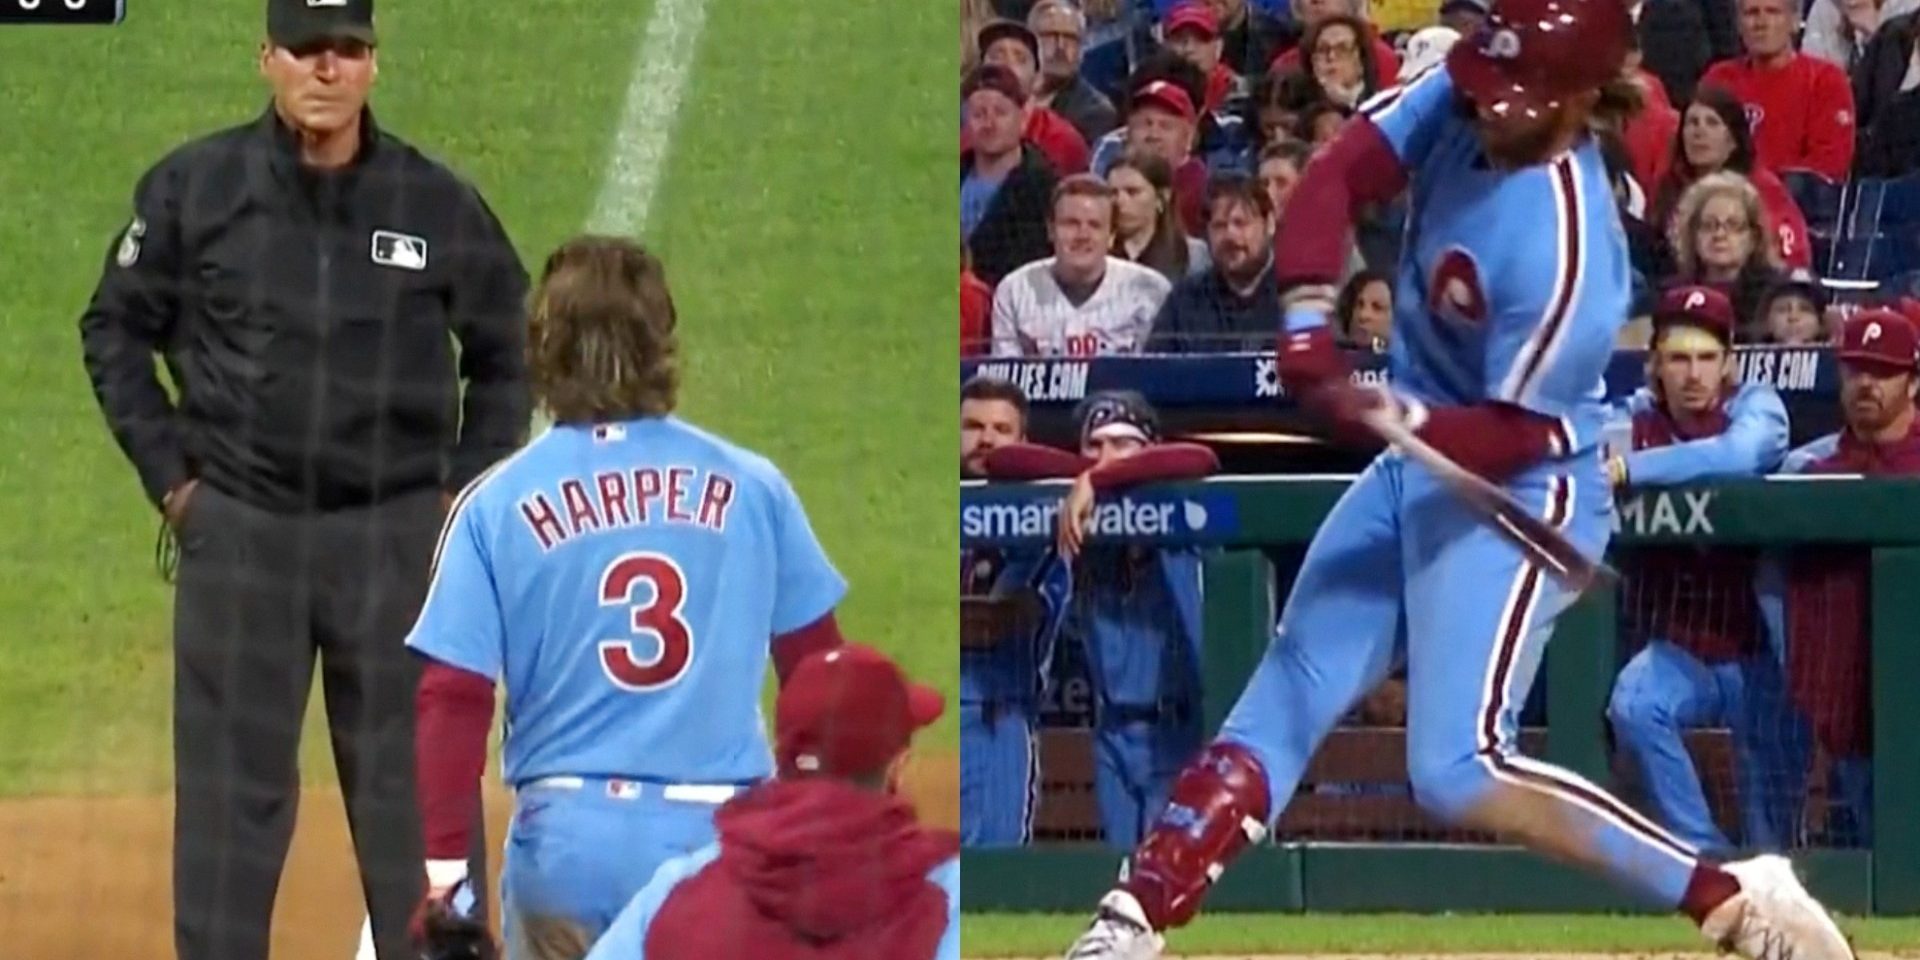 Bryce Harper goes crazy, gets ejected after Angel Hernandez makes egregious call